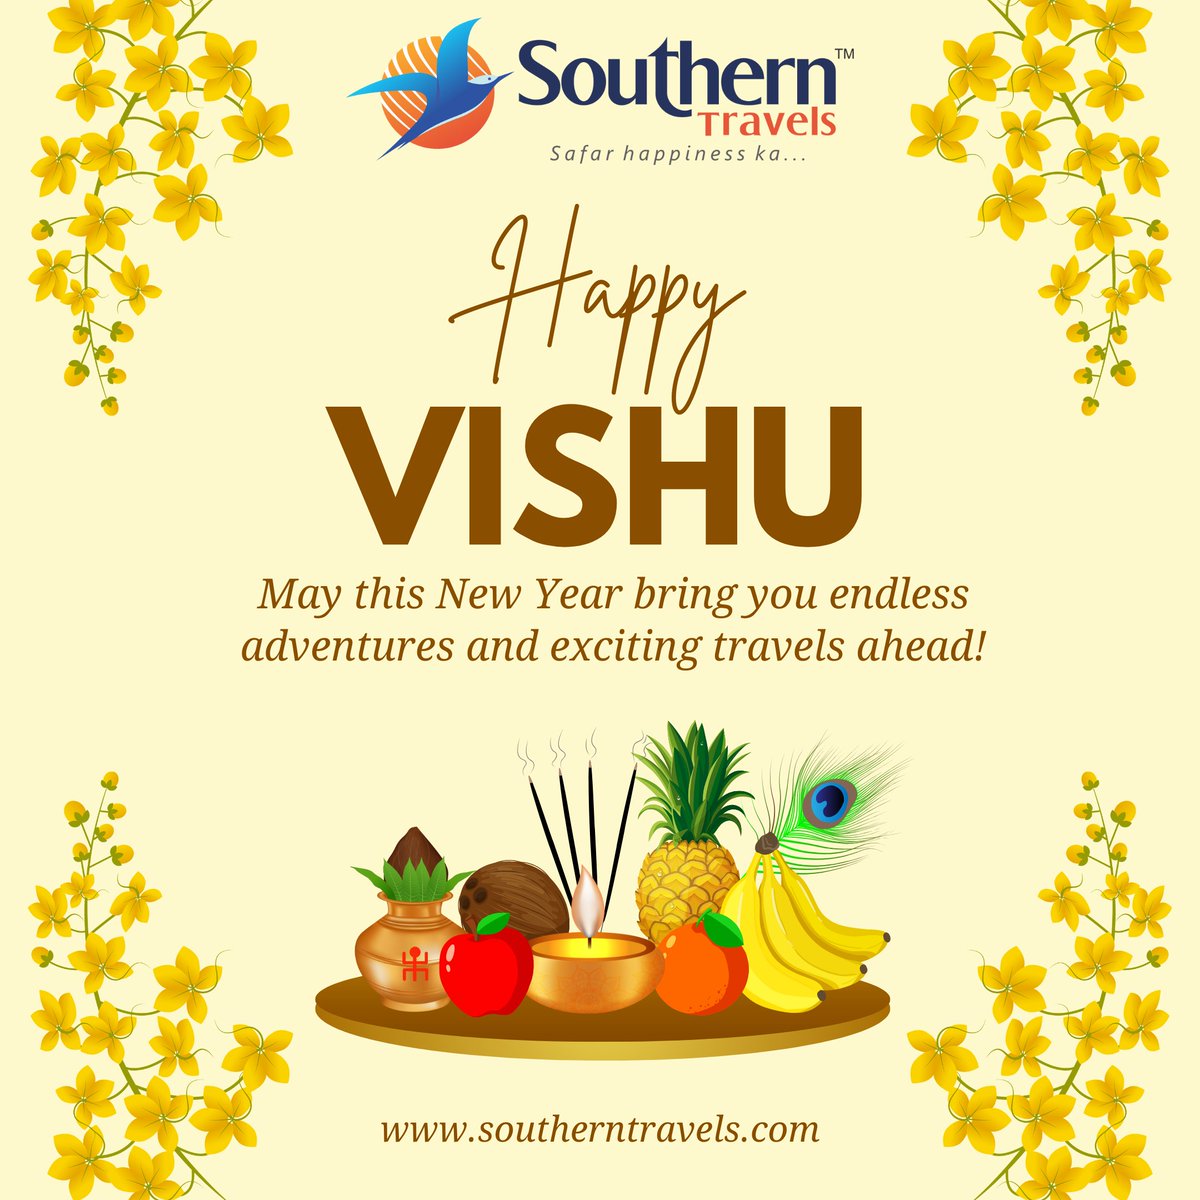 Happy Vishu! 🎉 Wishing you a year filled with new adventures and unforgettable travels! Contact us at 1800 11 0606 or email tours@southerntravels.in to start planning your next trip! #Vishu #NewYear #SouthernTravels